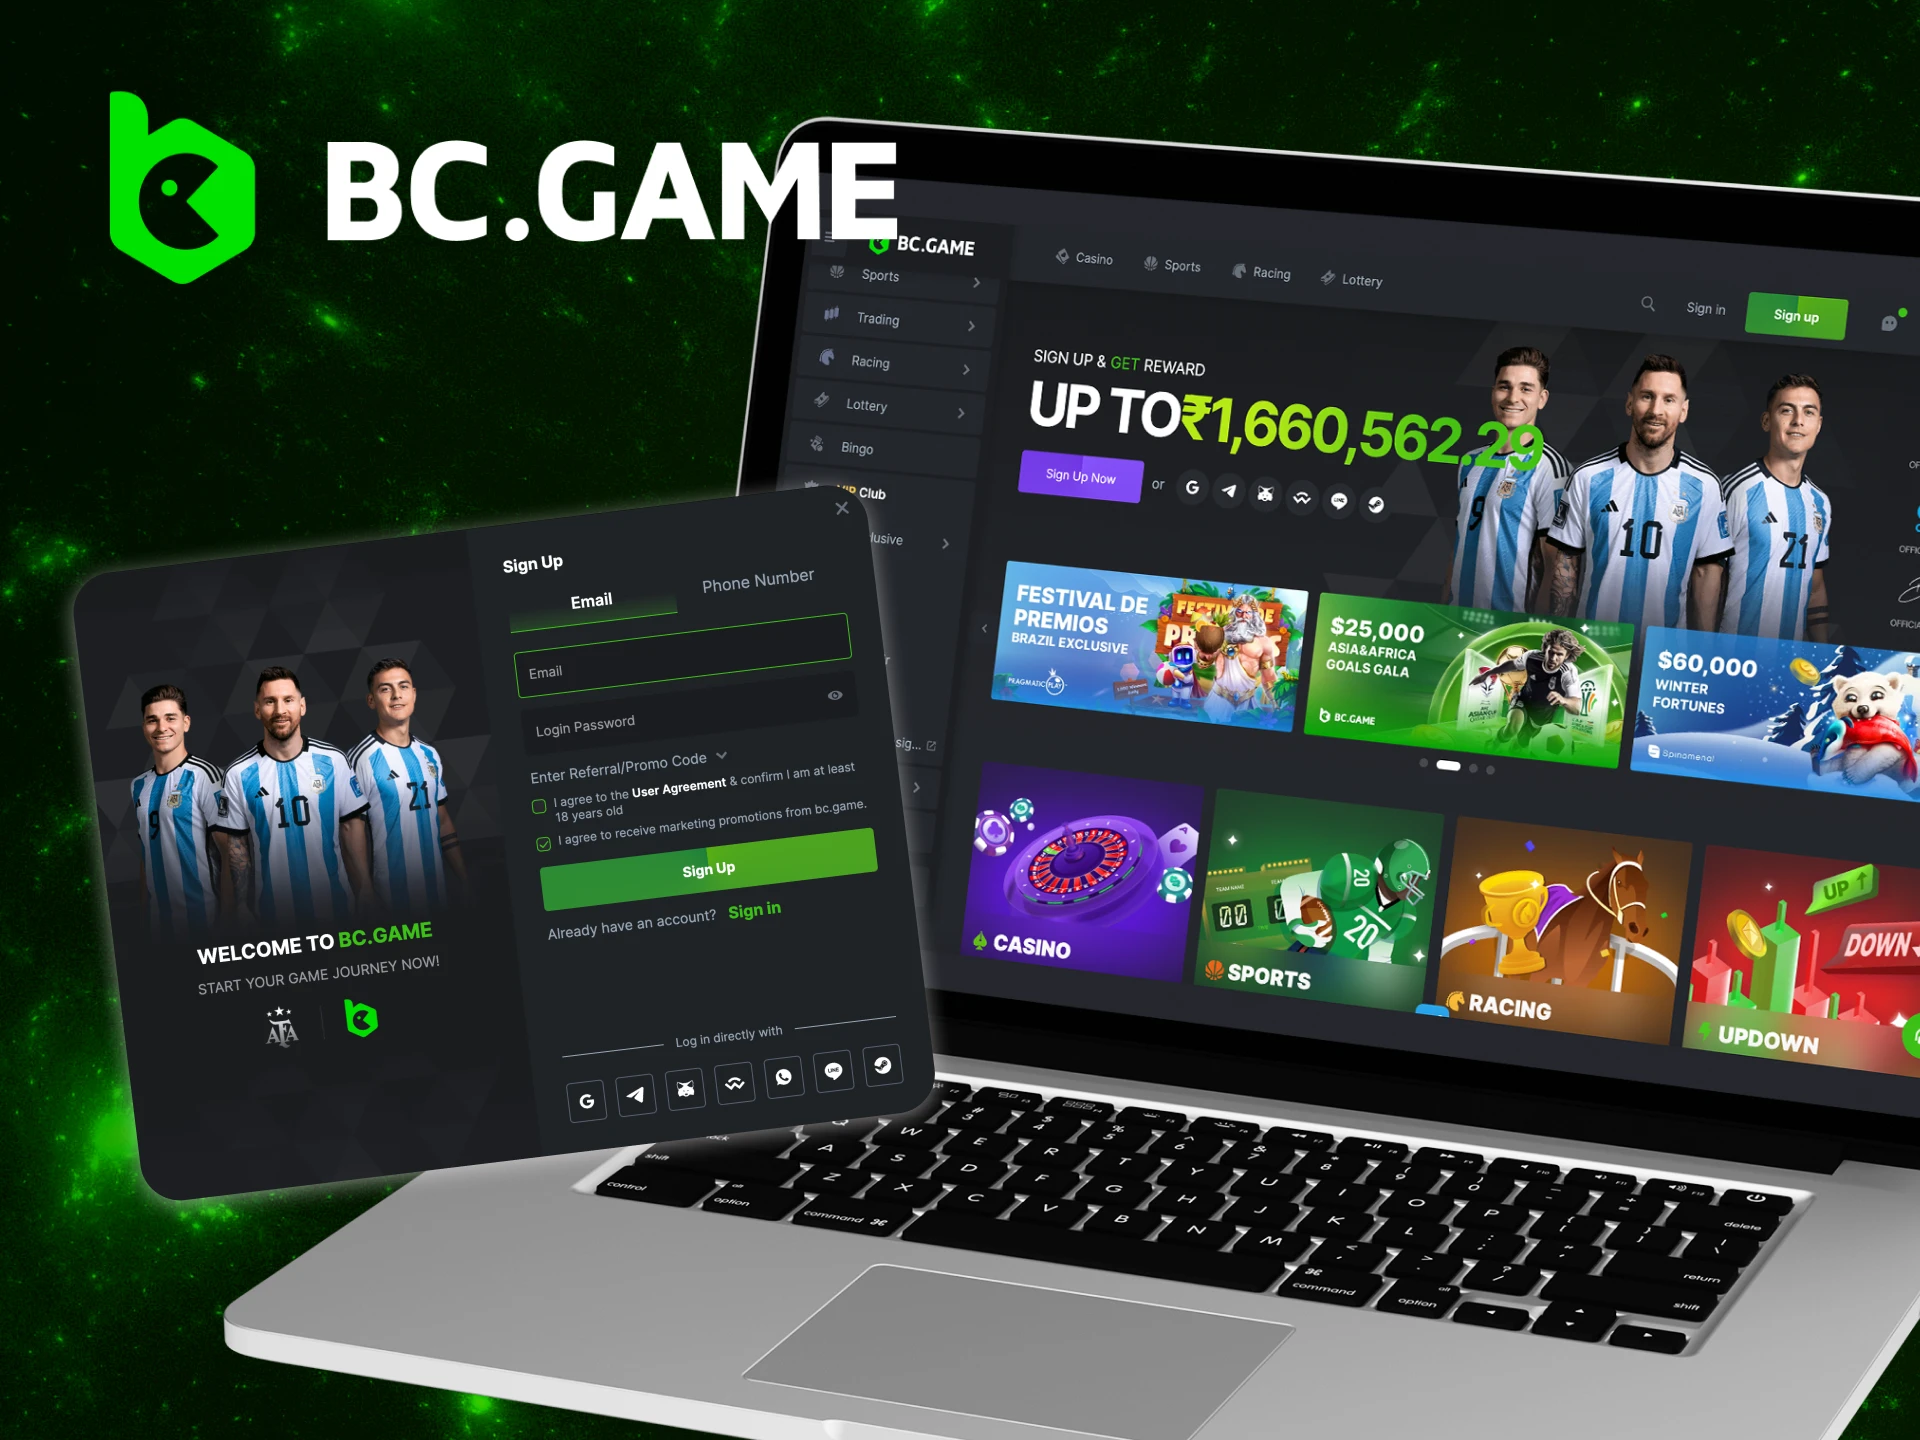 Instructions on how to register on the BC Game casino website.